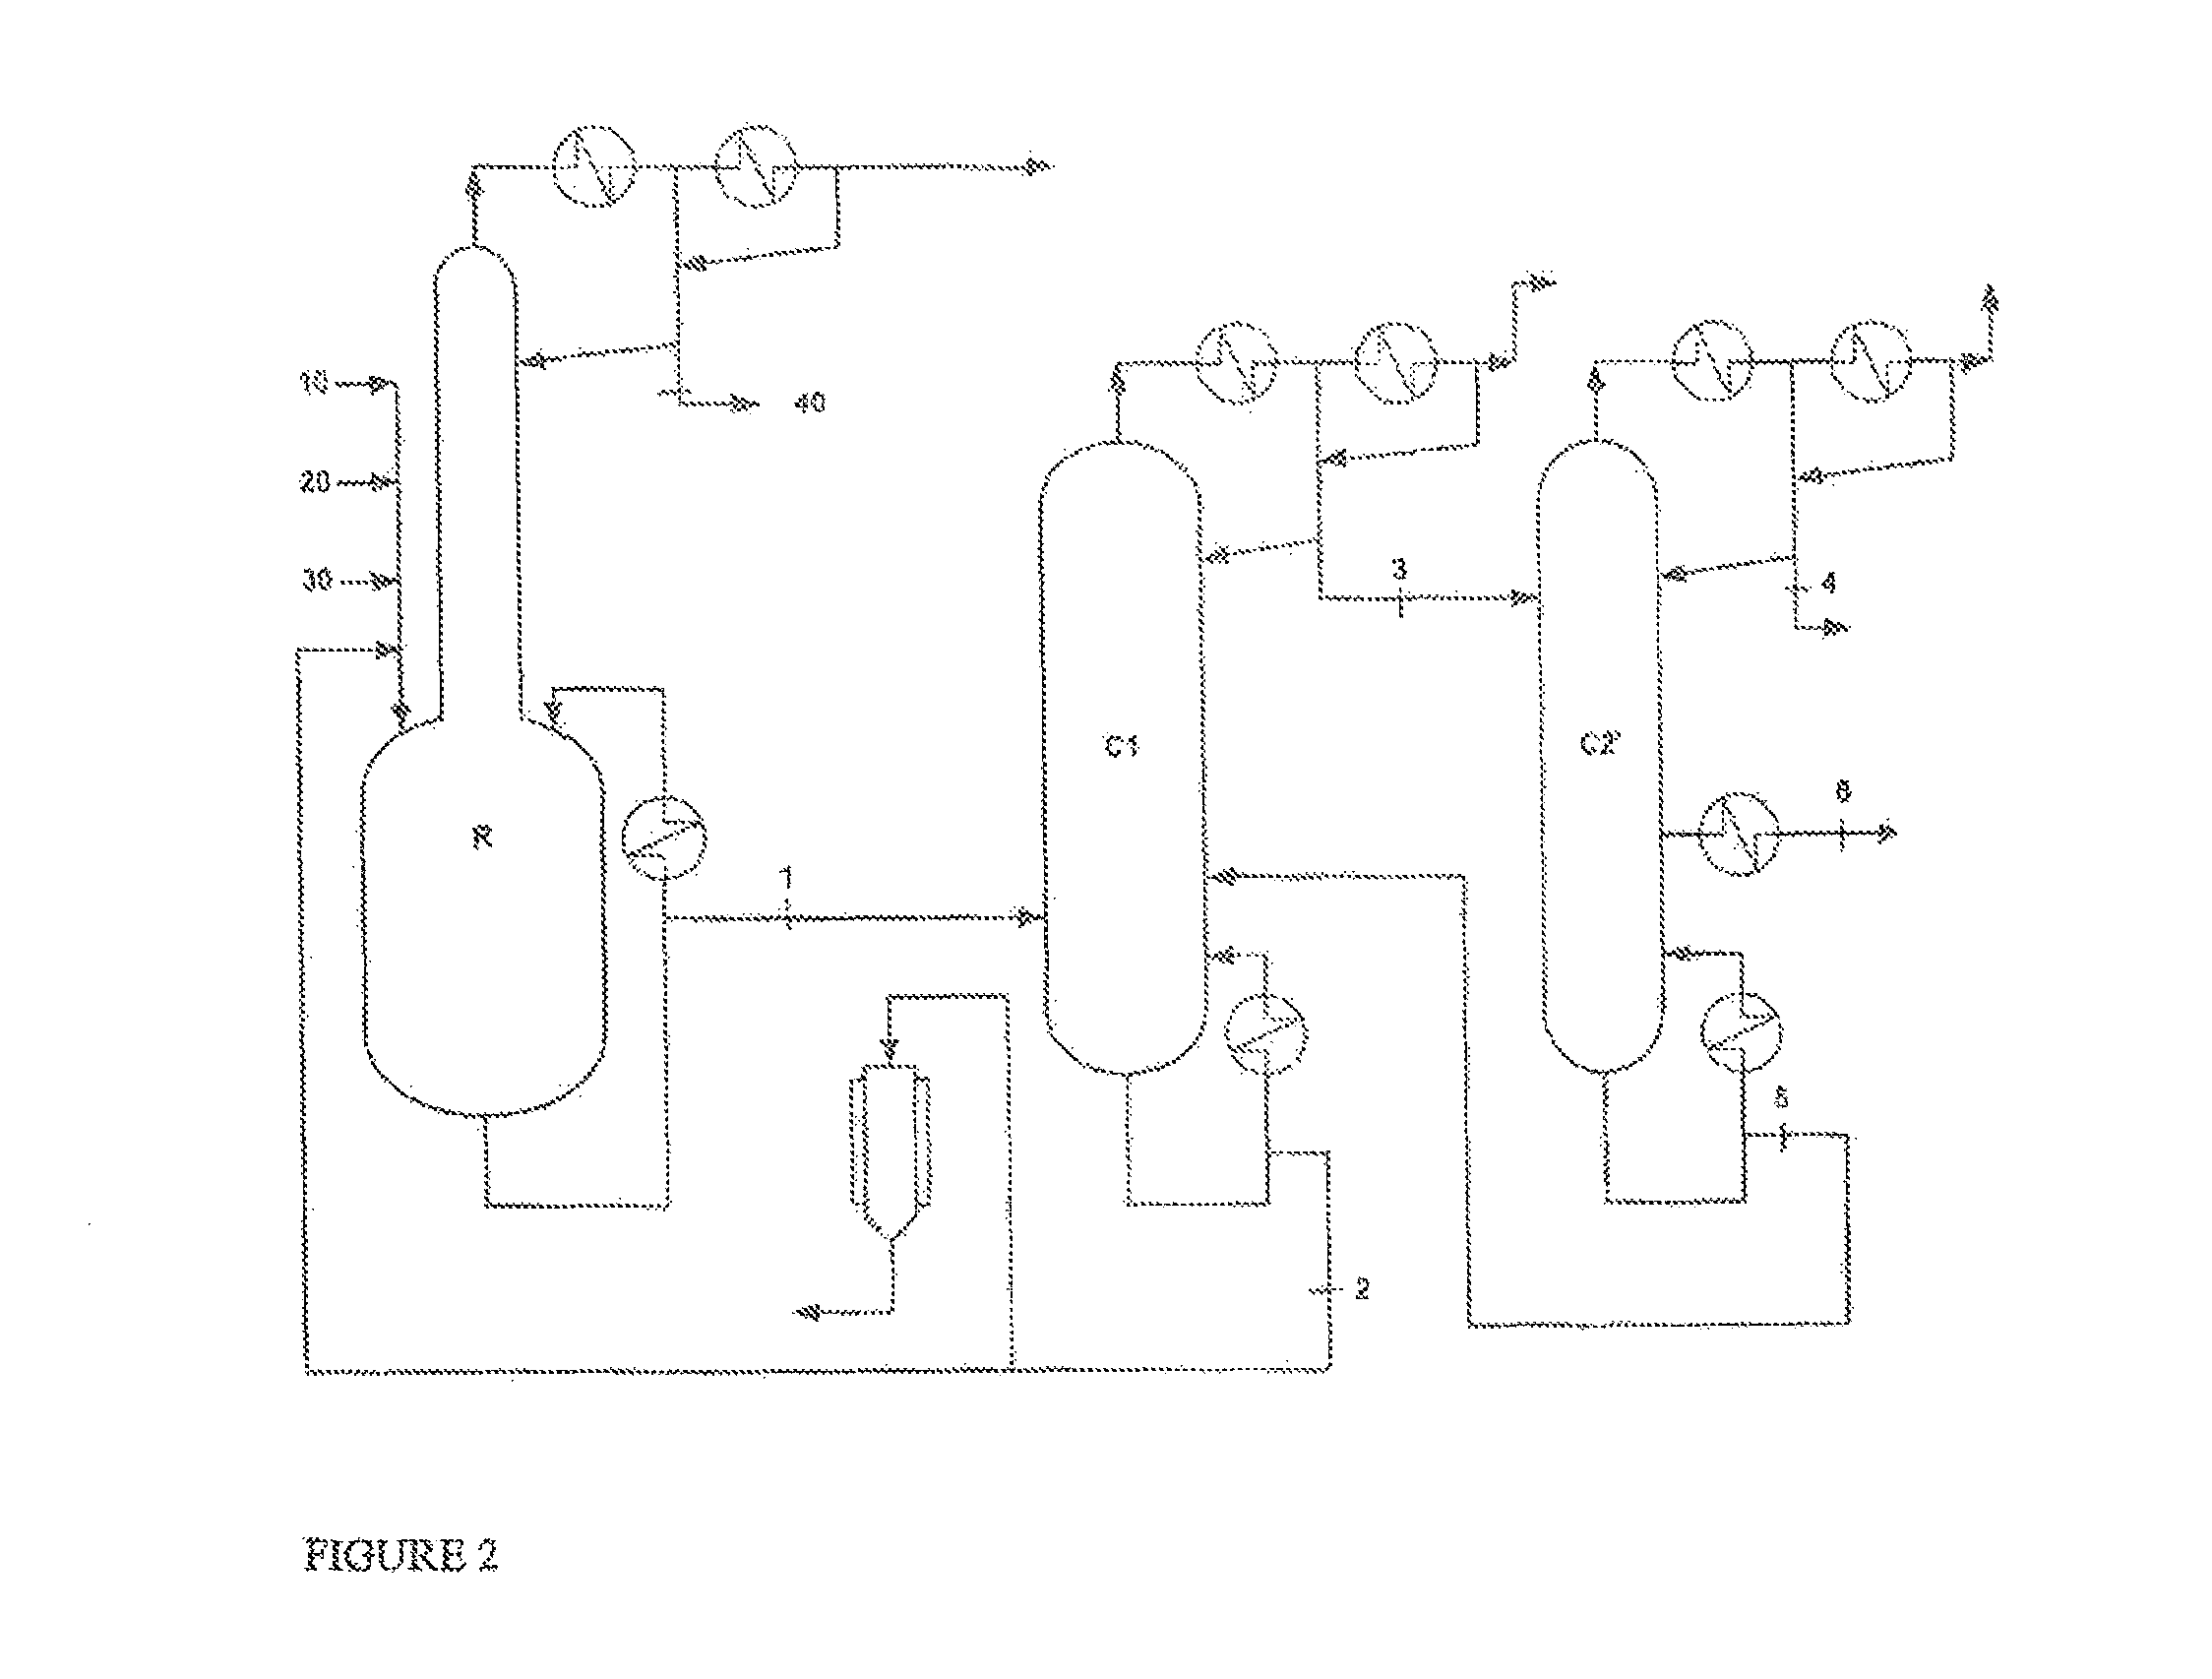 Method for the production of 2-octyl acrylate by means of transesterification